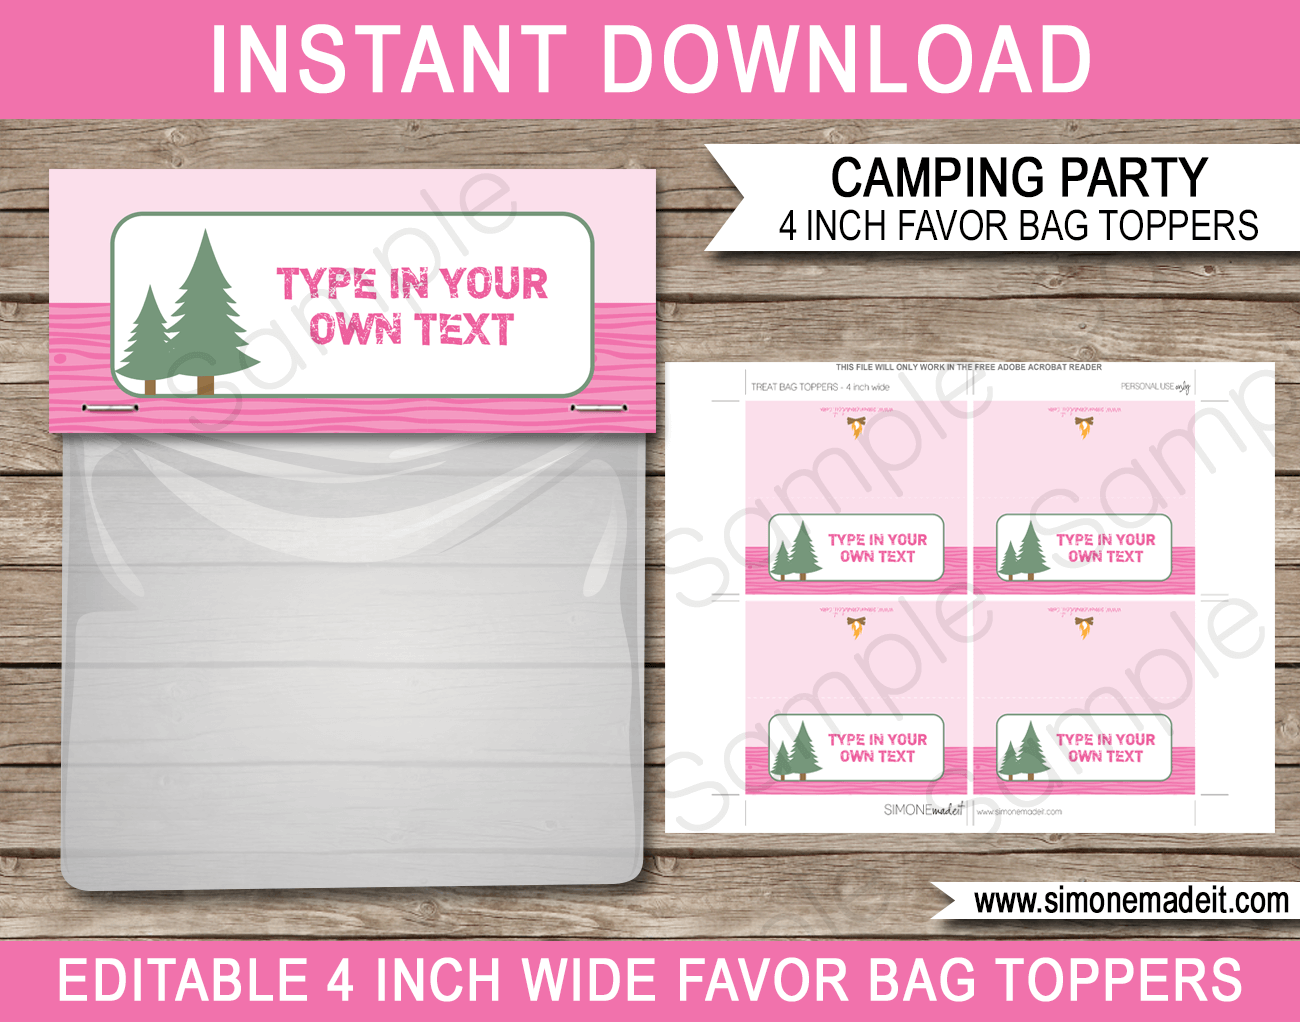 Pink Girl Camping Party Favor Bag Toppers | Birthday Party | Editable DIY Template | $3.00 INSTANT DOWNLOAD via SIMONEmadeit.com